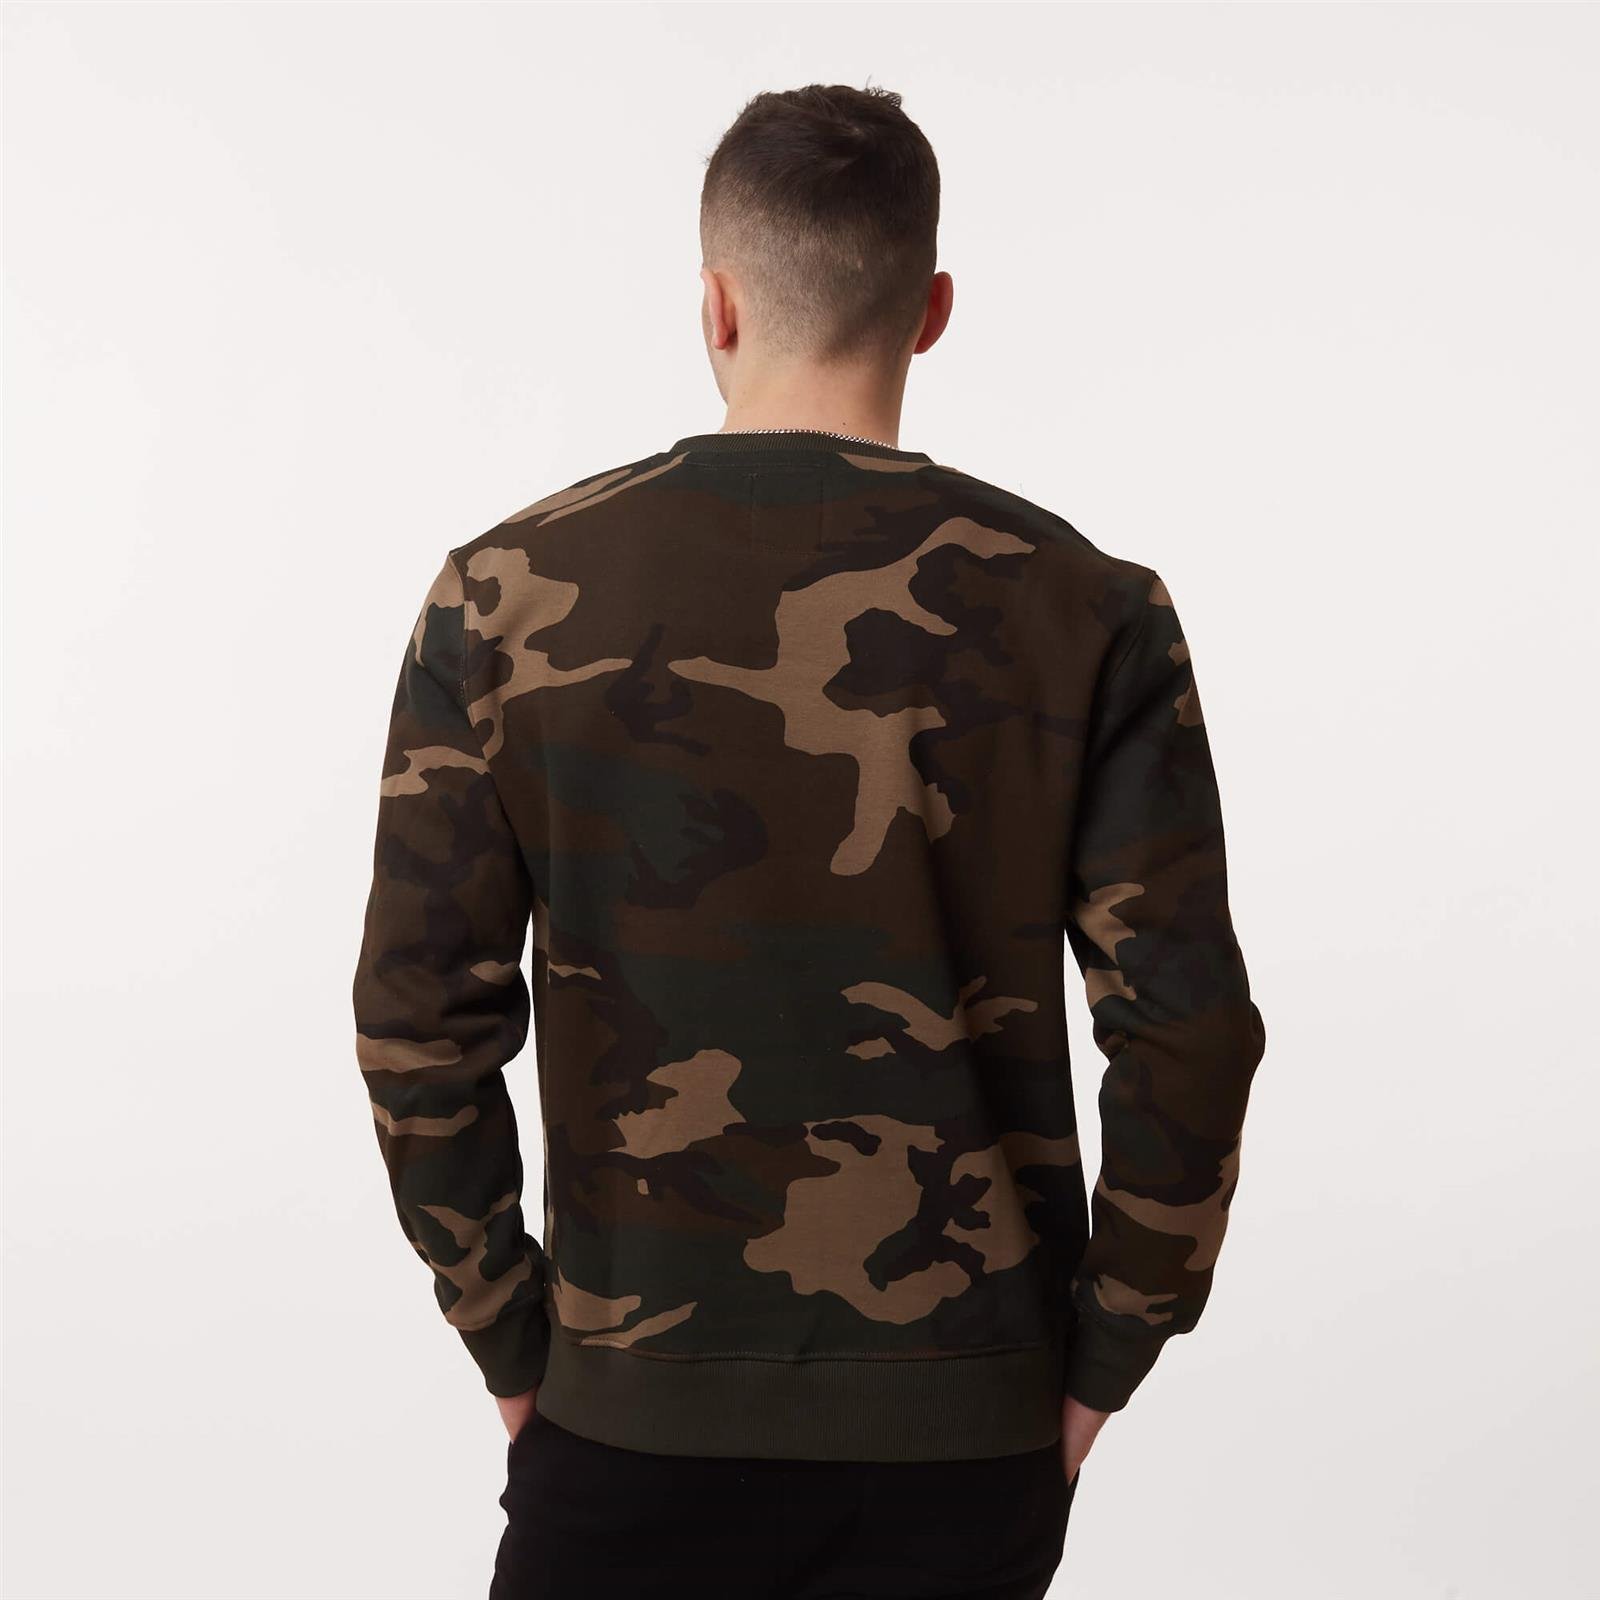 \\ | Camo Sweater clothing Men #Brands \\ Alpha \\ Brands \\ clothing WDL #Recommended brands Basic \\ Industries Sweatshirts \\ Industries Men\'s Ellesse Alpha 65 Men